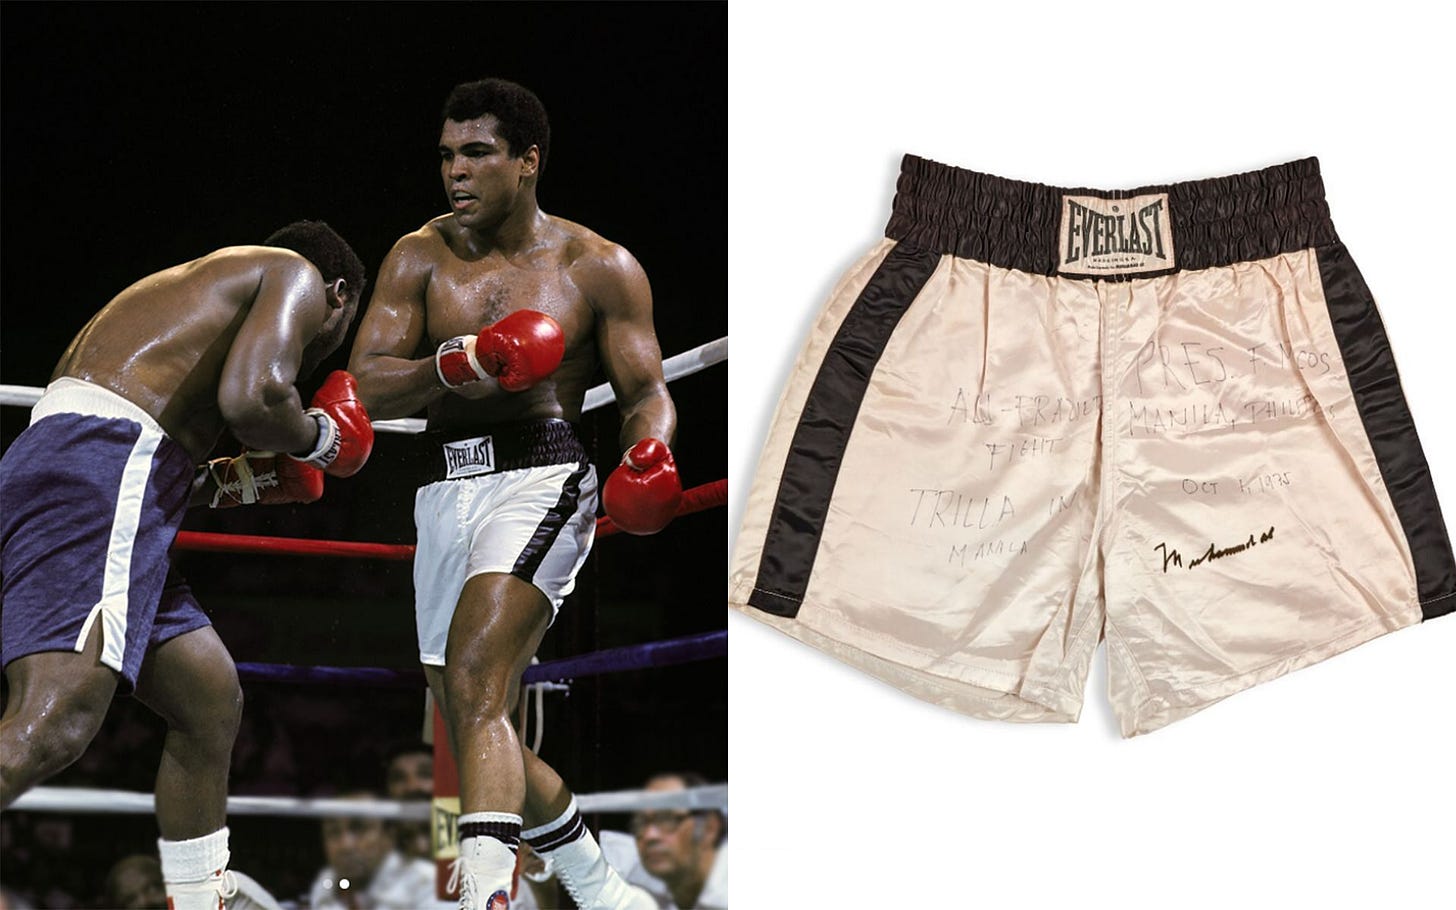 Muhammad Ali during his trilogy fight against Joe Frazier (left) and his boxing trunks from the fight (right) [Images Courtesy: @muhammadali Instagram and sothebys.com]